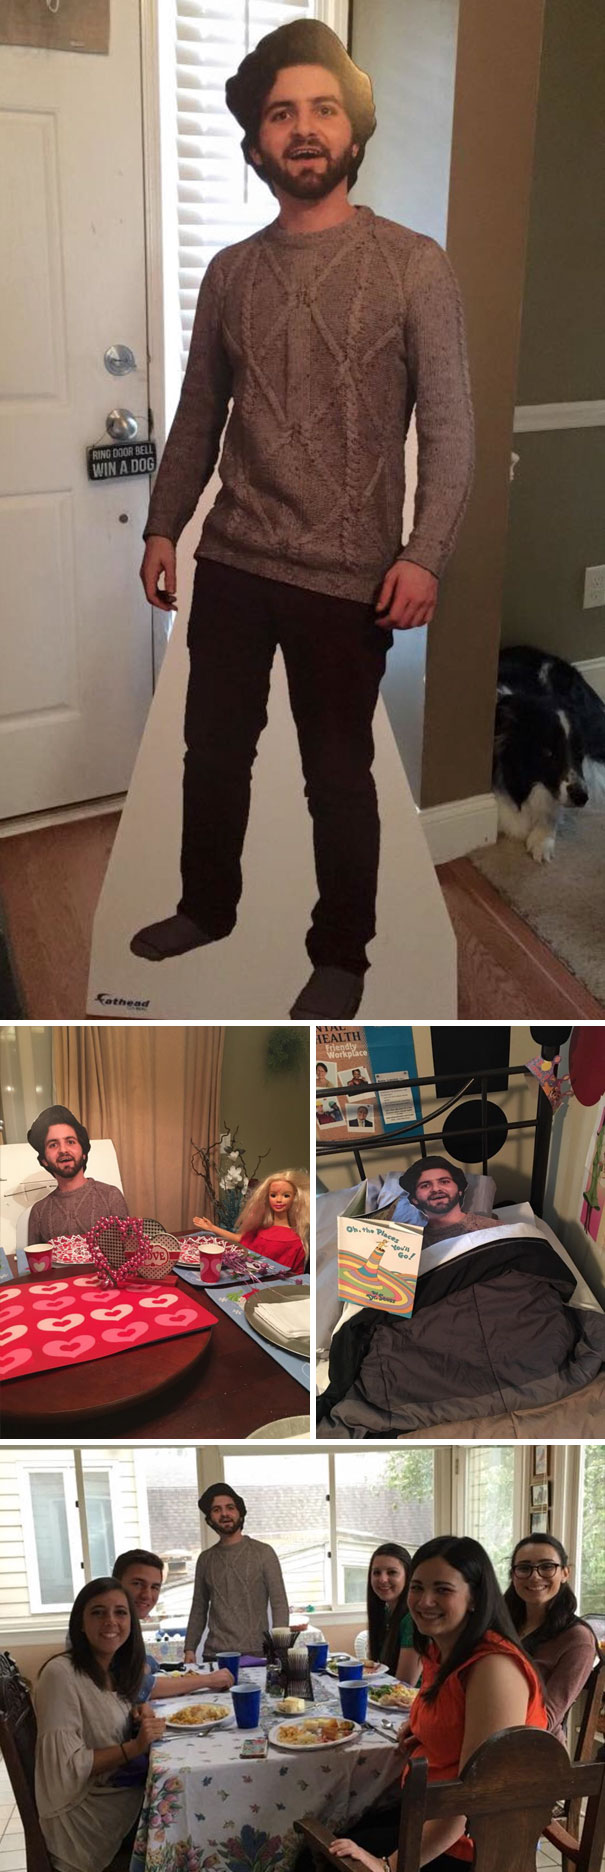 Son Studying Abroad Sent Mom Cutout Of Himself And Thought They'd Laugh And Put Somewhere In The Corner. But His Mom Decided To Take The Cutout Along To Family Gatherings